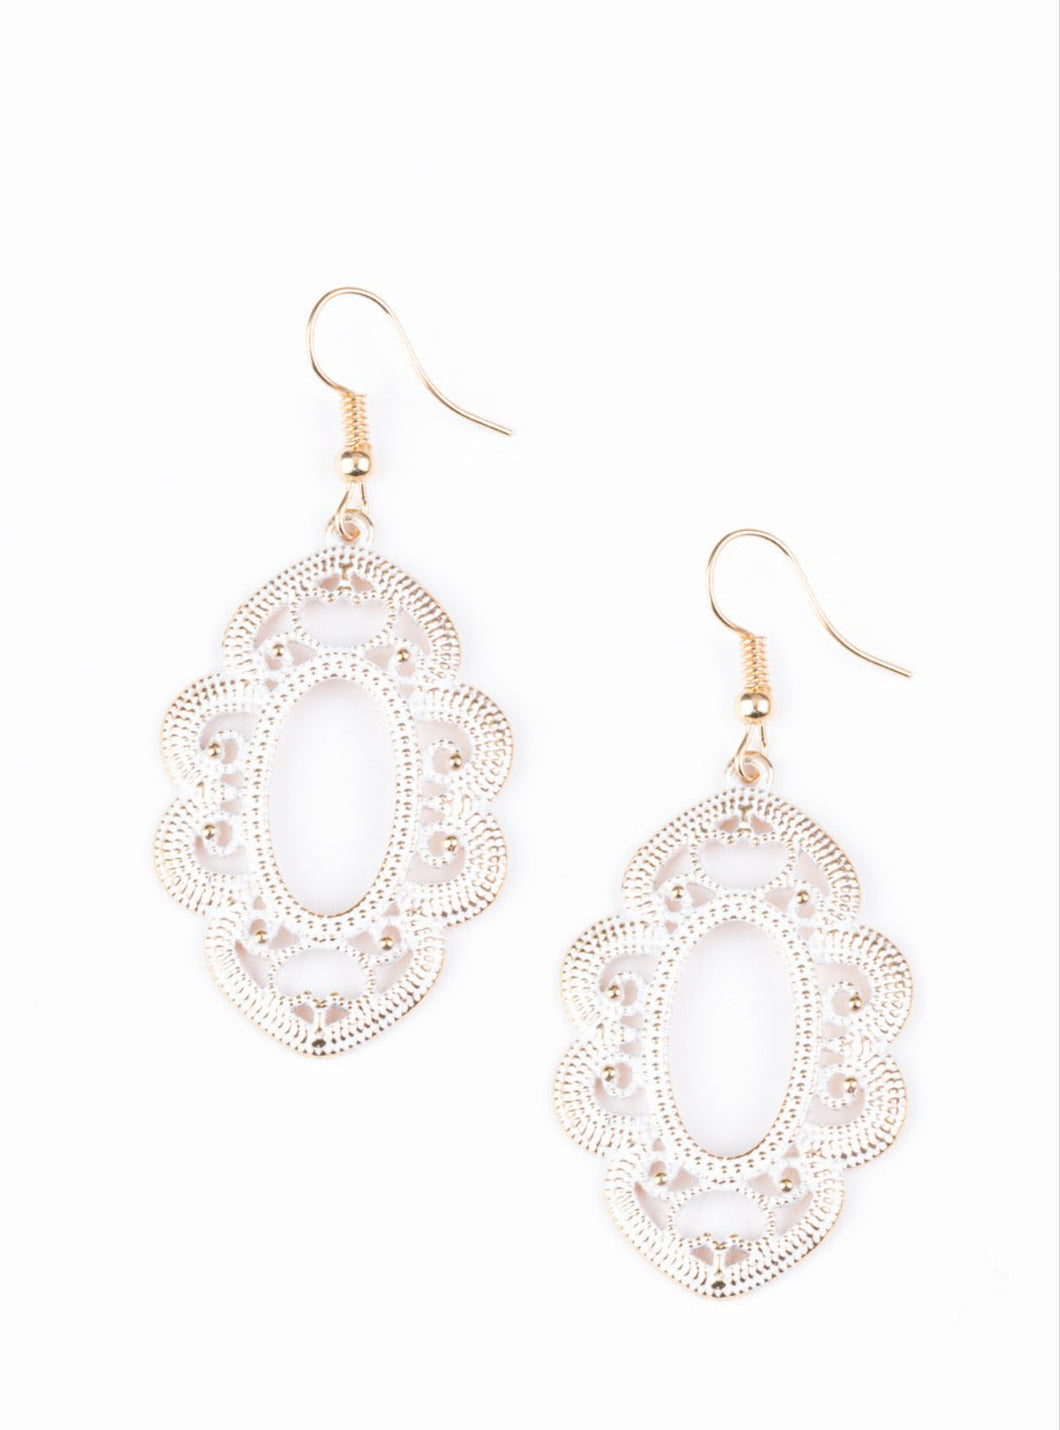 Mantras and Mandalas Gold and White Earrings